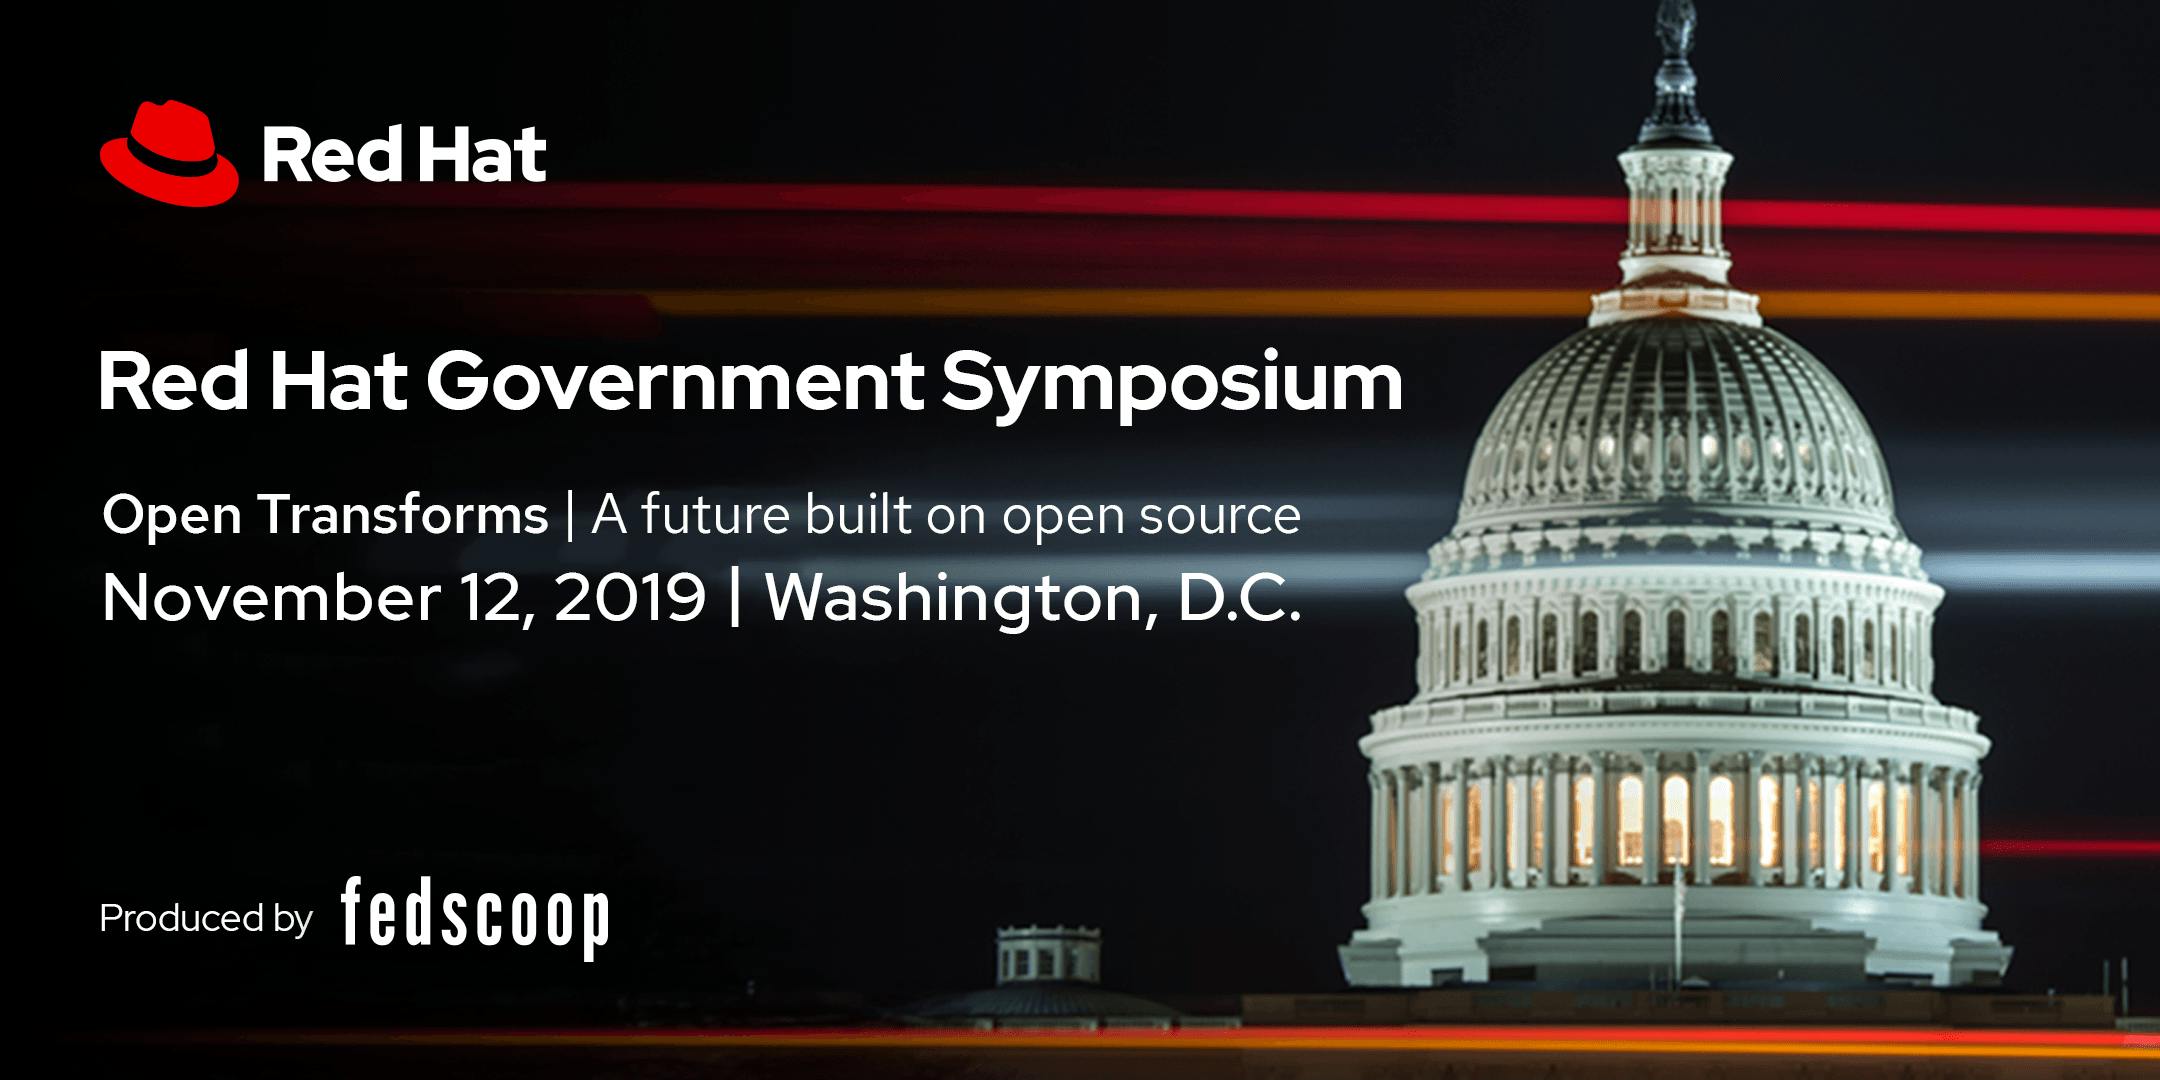 Red Hat Government Symposium 2019